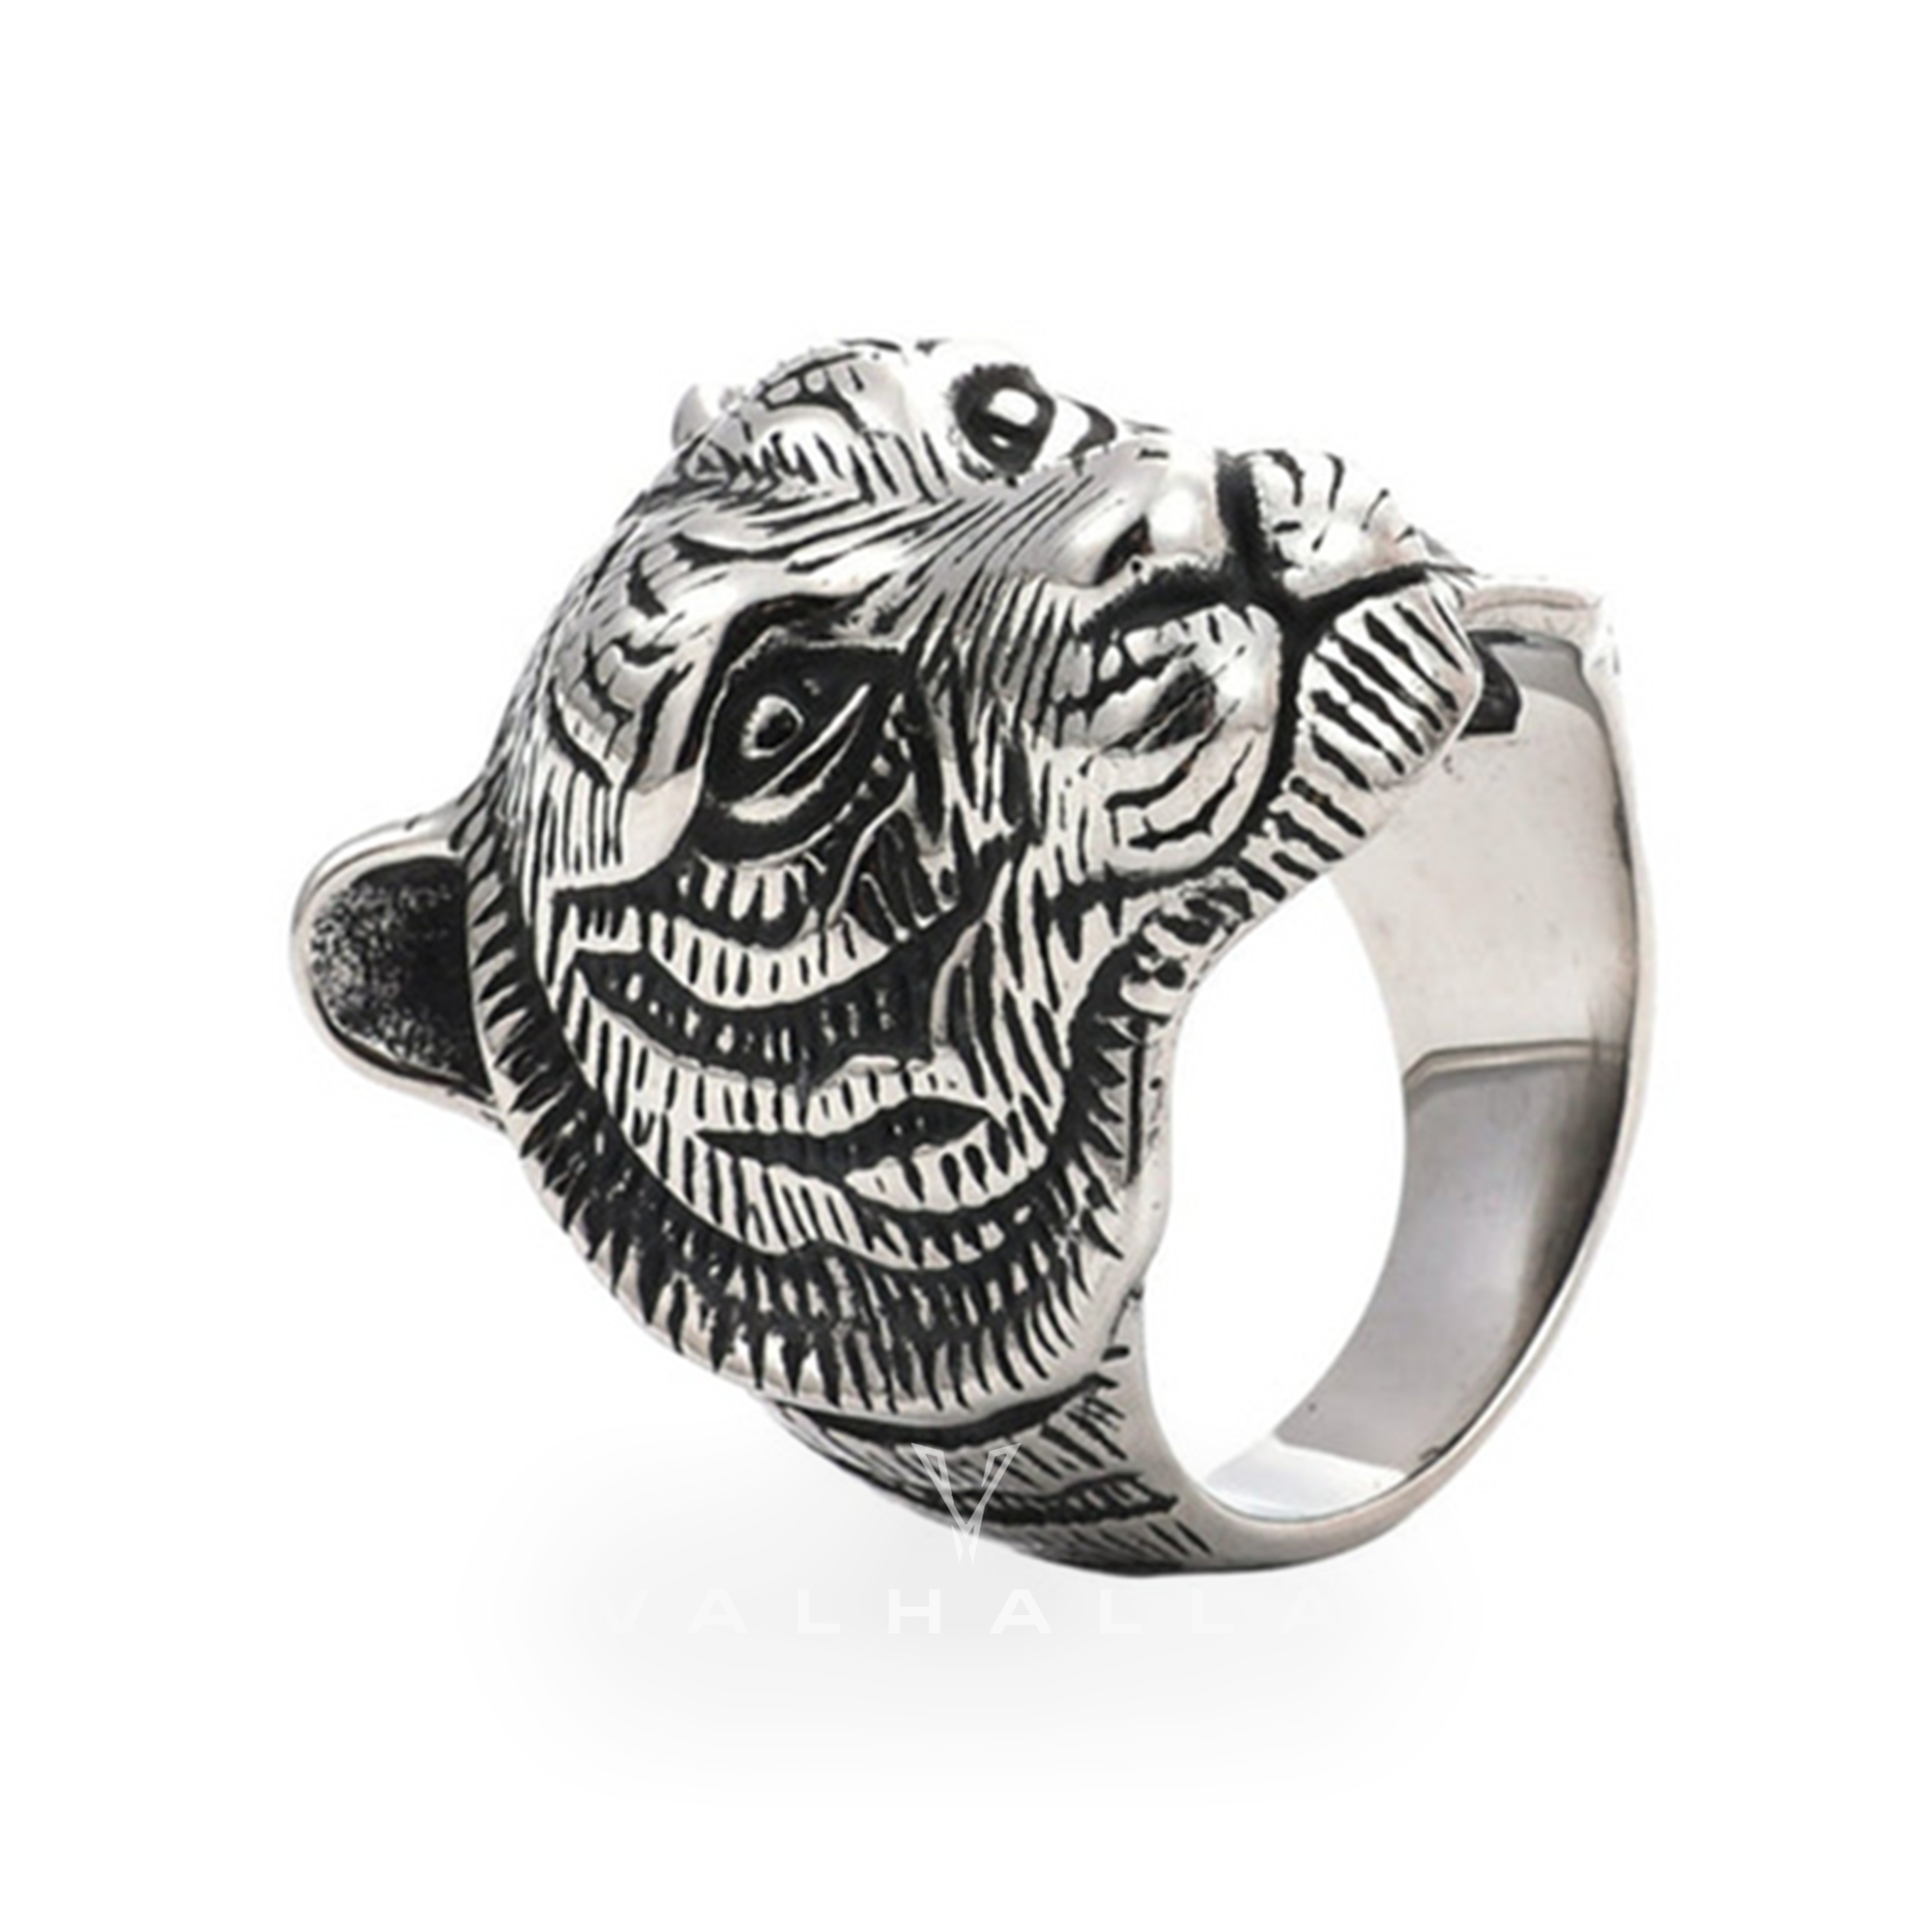 Roaring Tiger Stainless Steel Open Ring